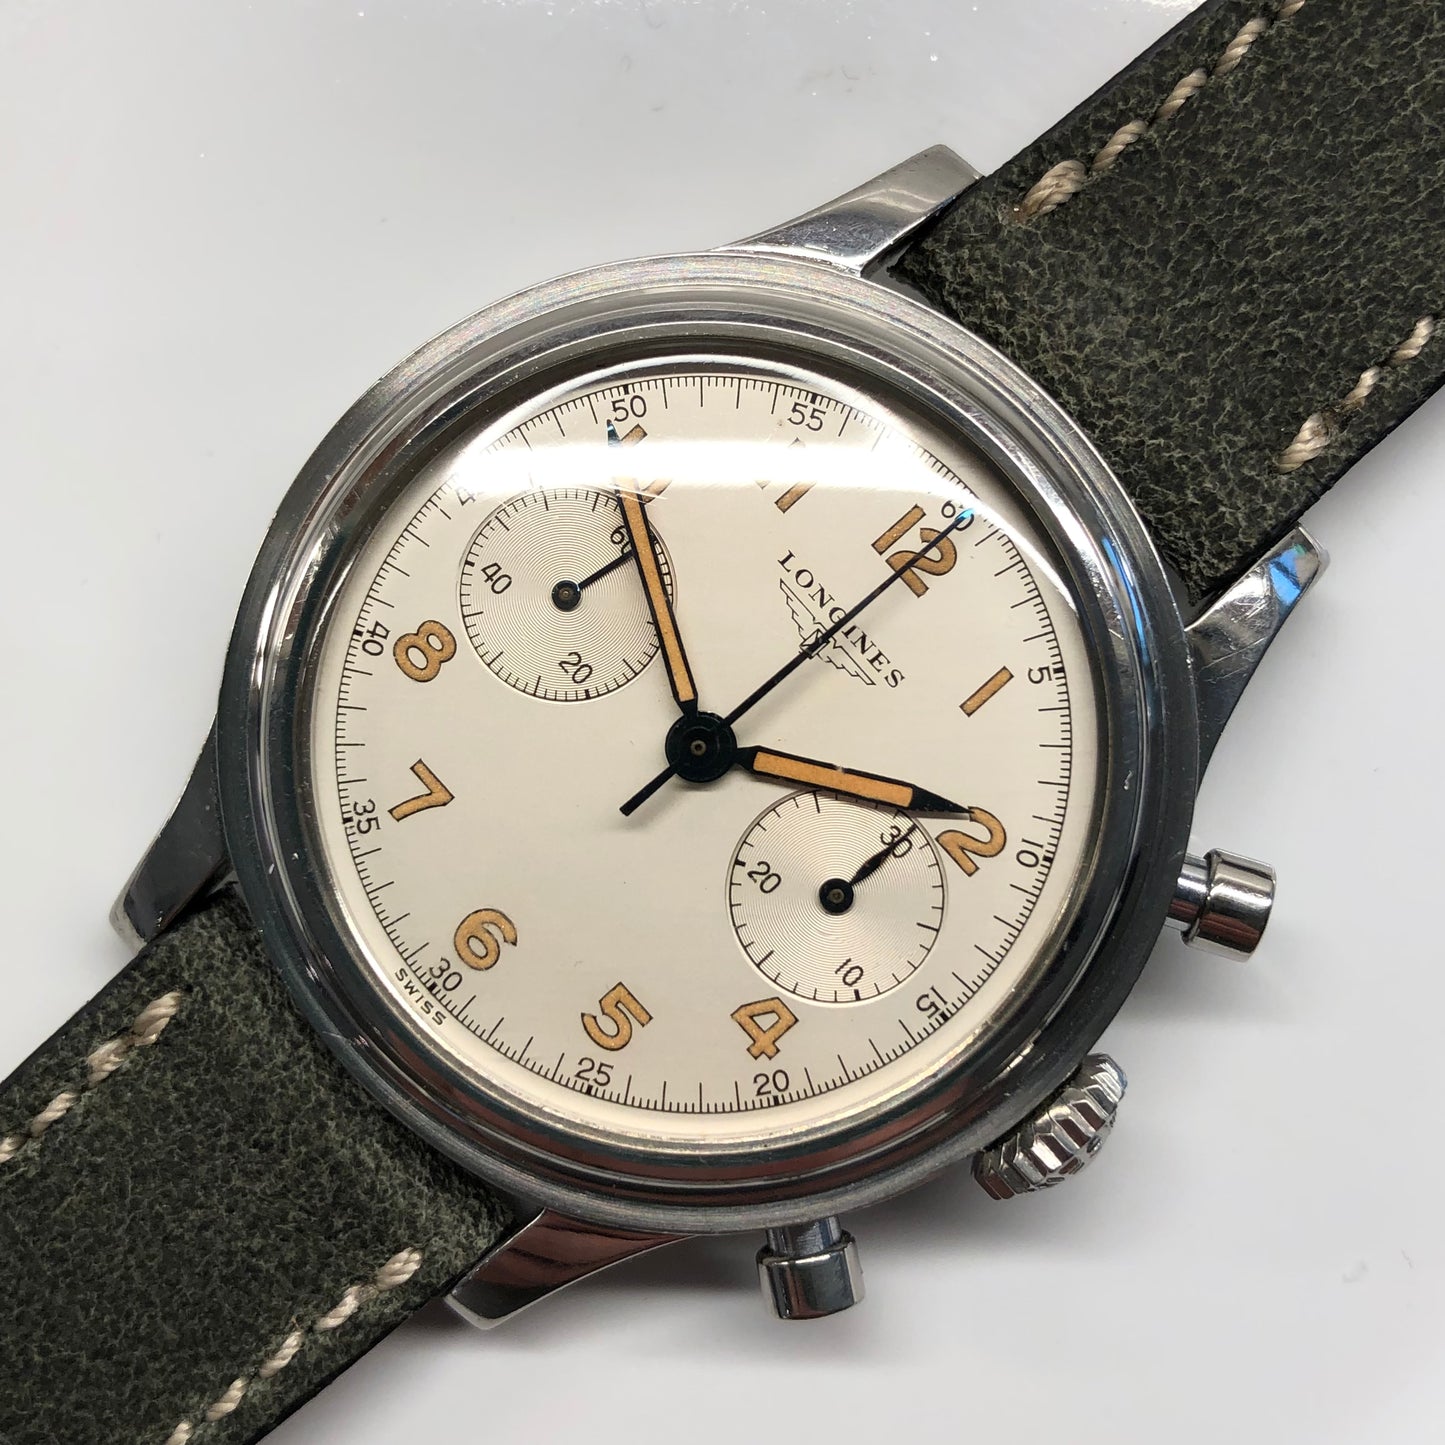 1960 Longines 6474 Stainless Steel 30CH Chronograph Telephone Dial Vintage Wristwatch with Extract - Hashtag Watch Company